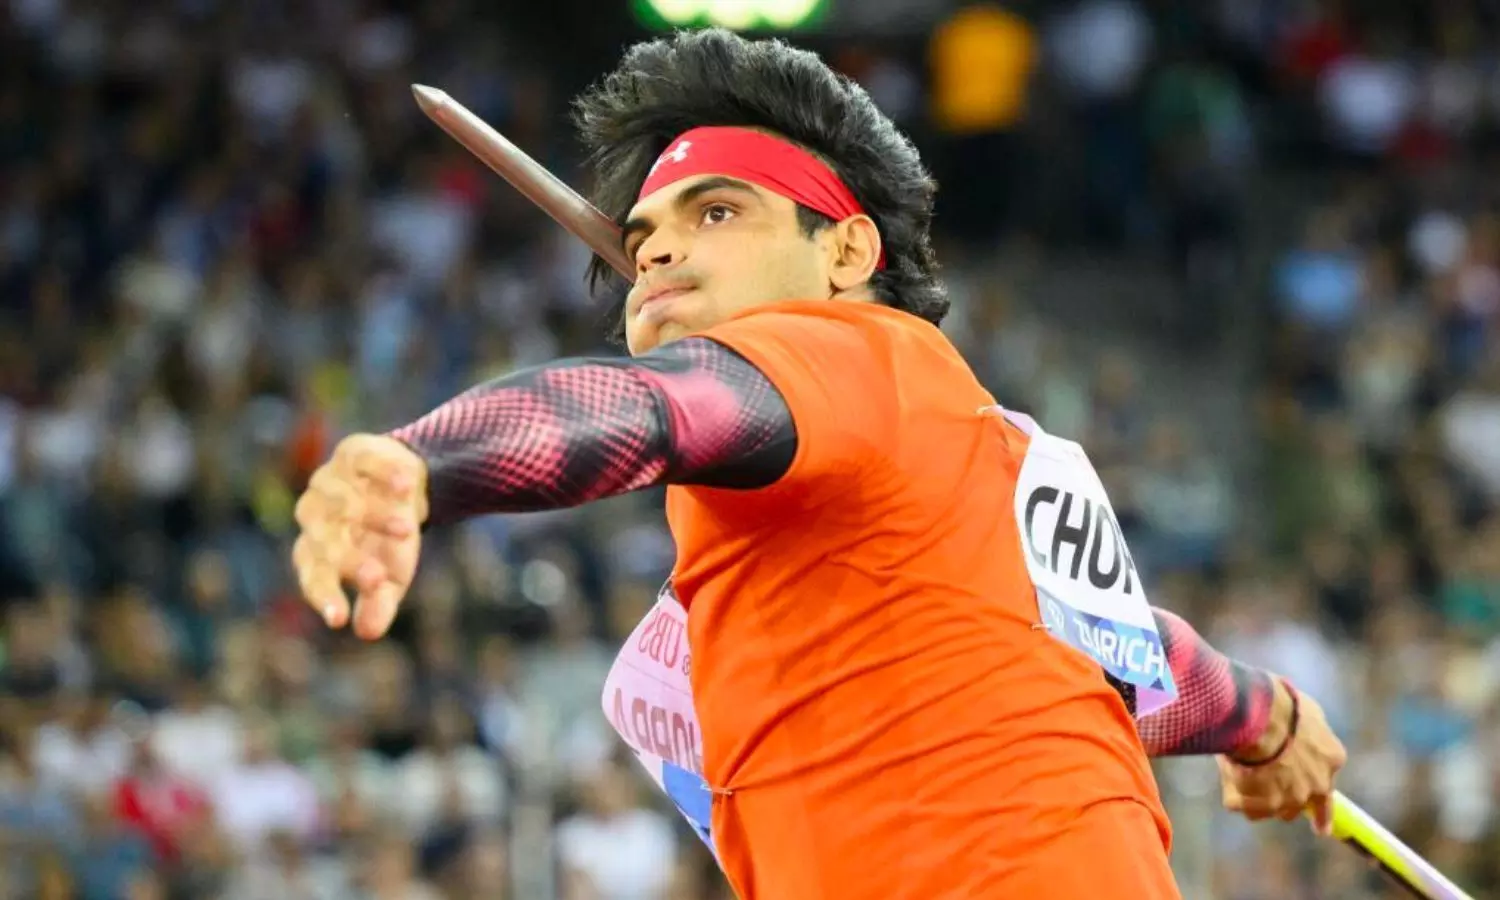 Neeraj Chopra and Kidambi Srikanth to train abroad, ministry releases funds for trips